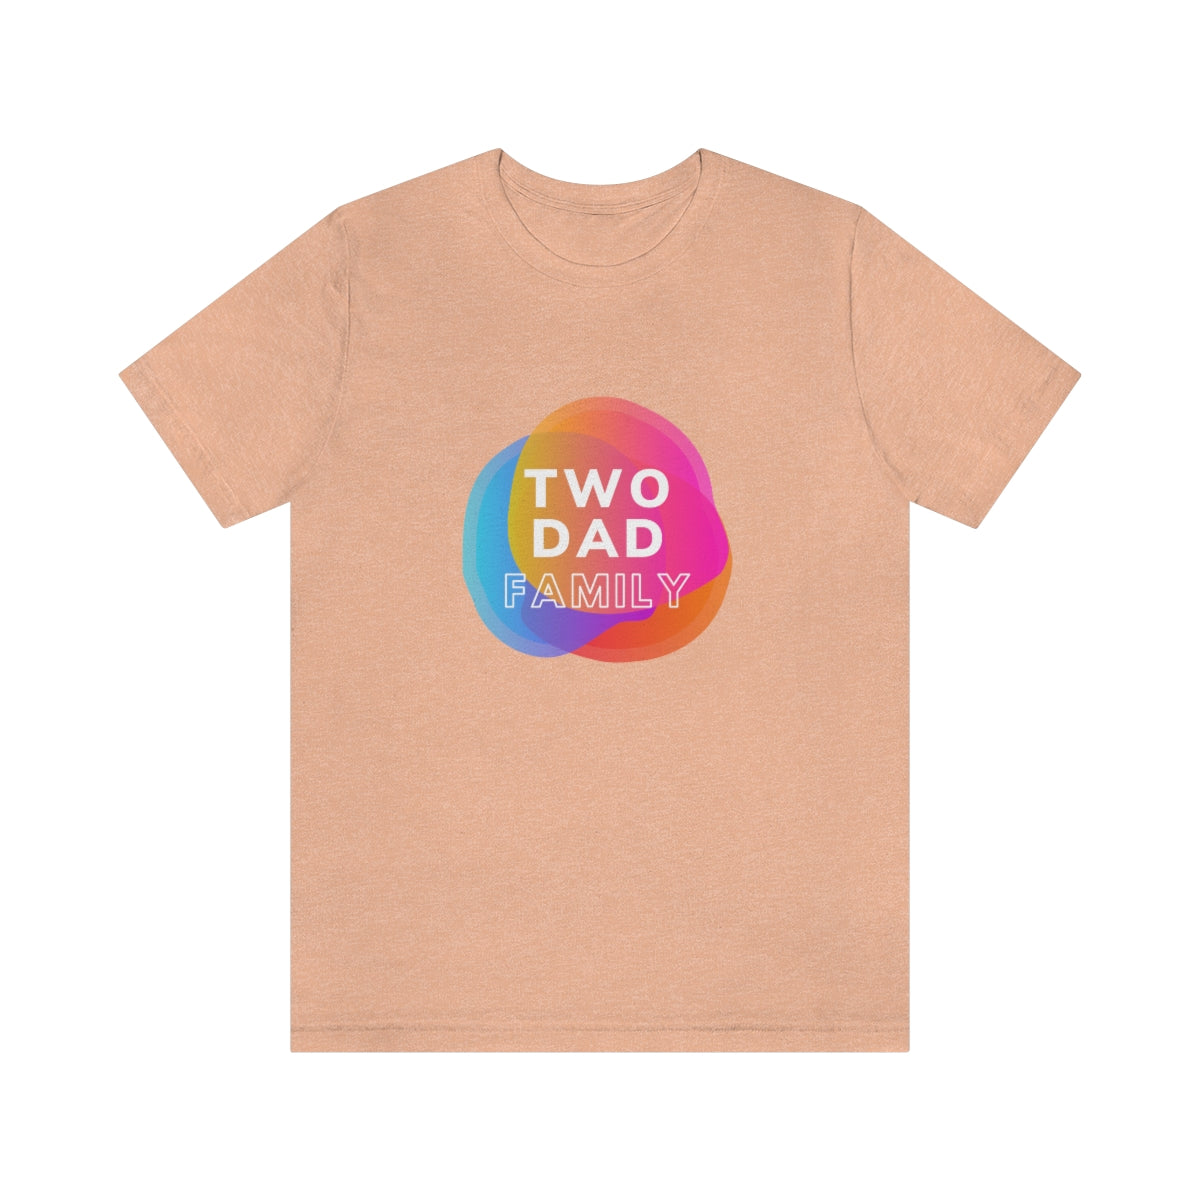 Two Dad Family T-Shirt